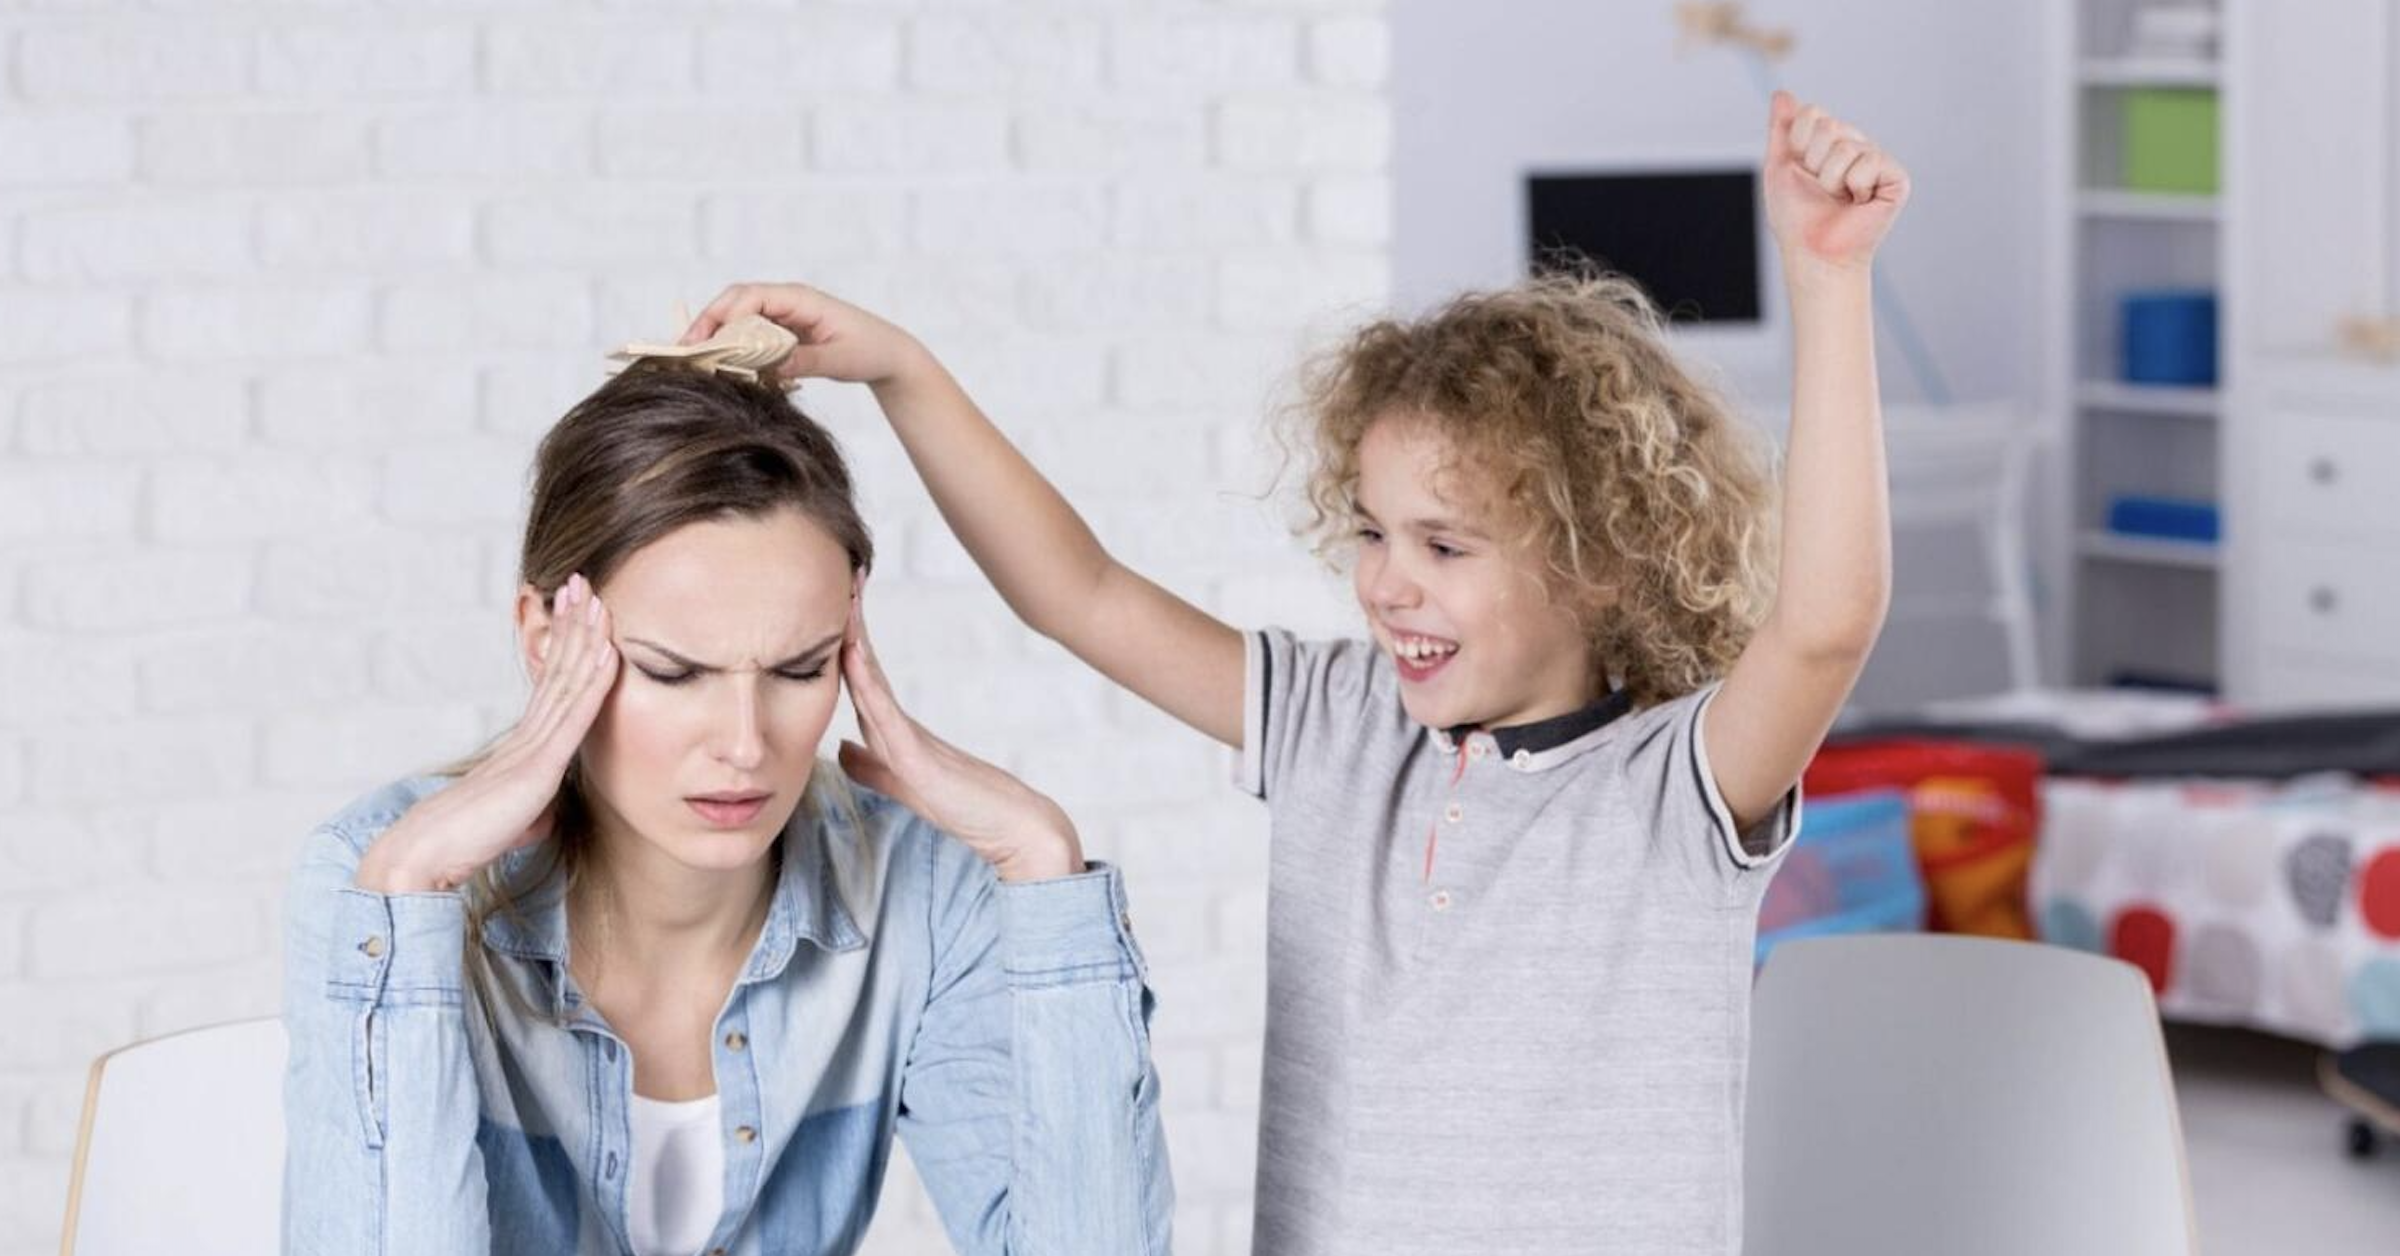 UAE: Psychologists urge parents to look out for signs of ADHD in children